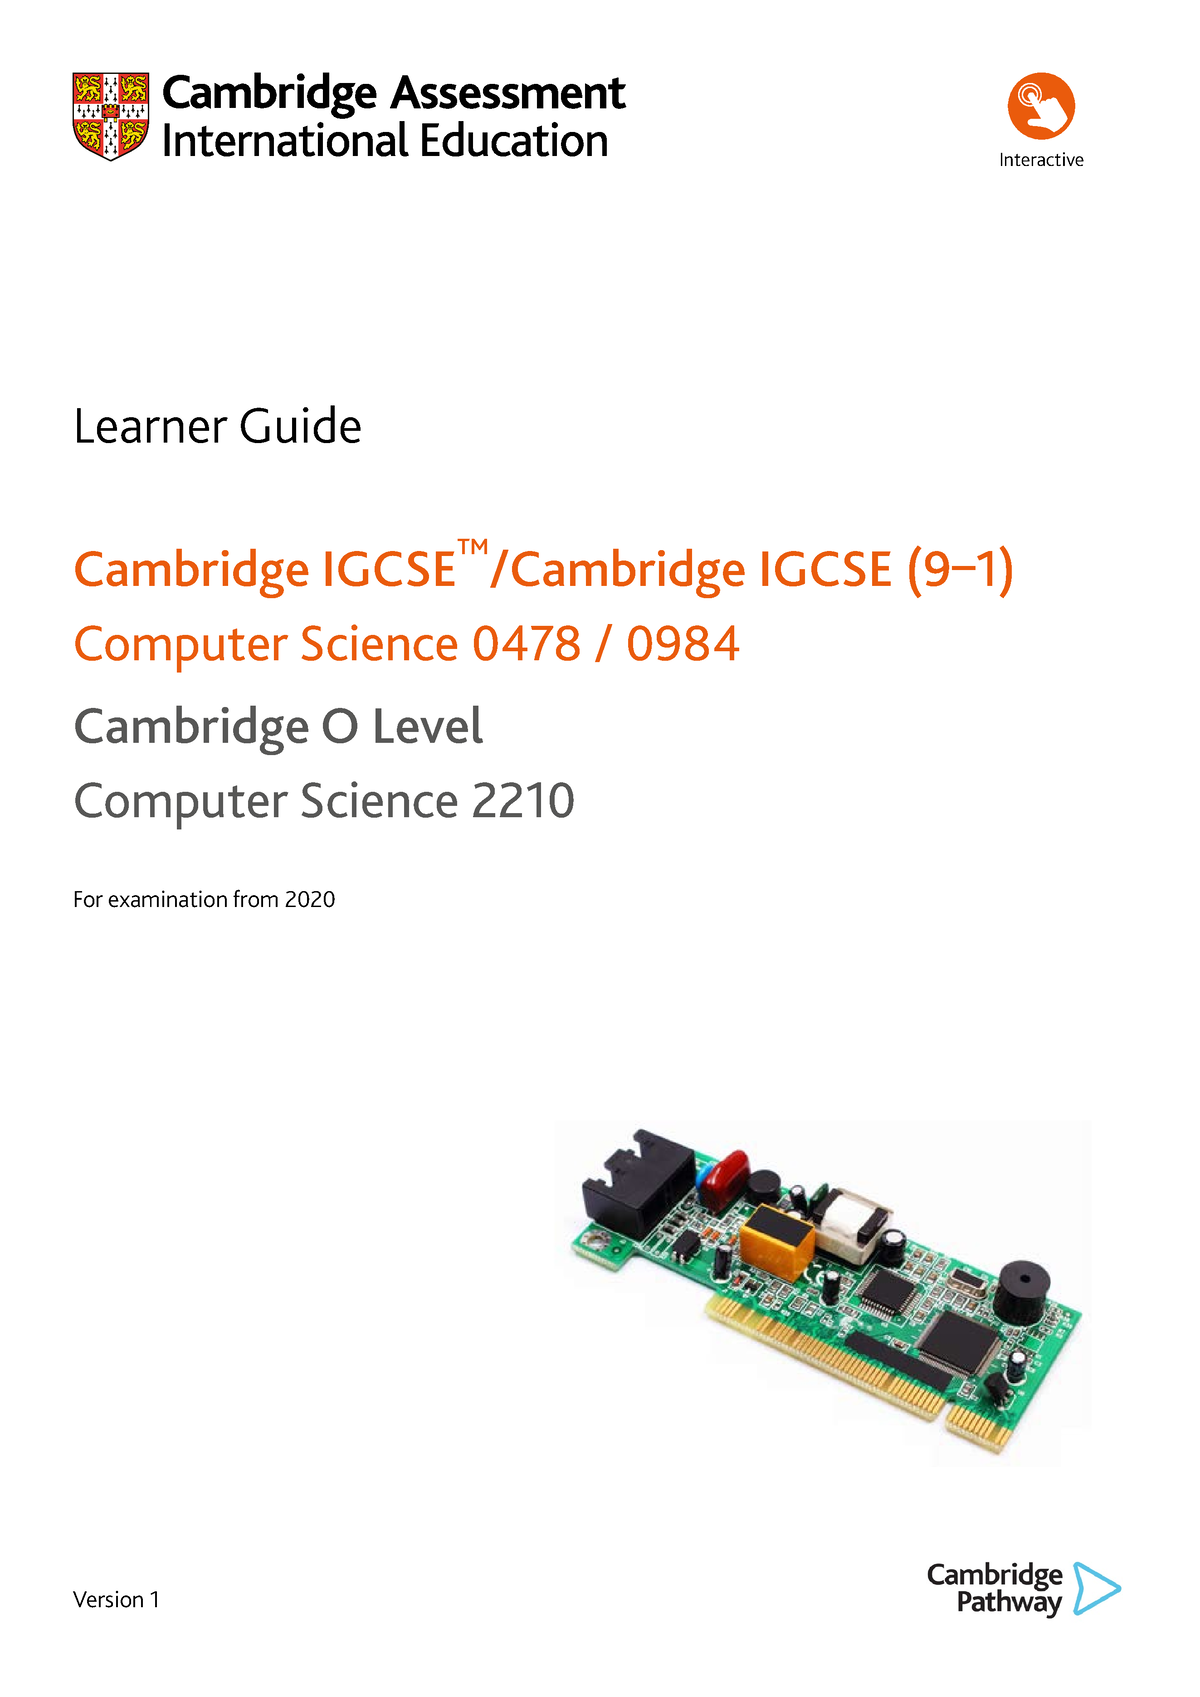 I have a question, in an IGCSE 9-1 subject for example computer